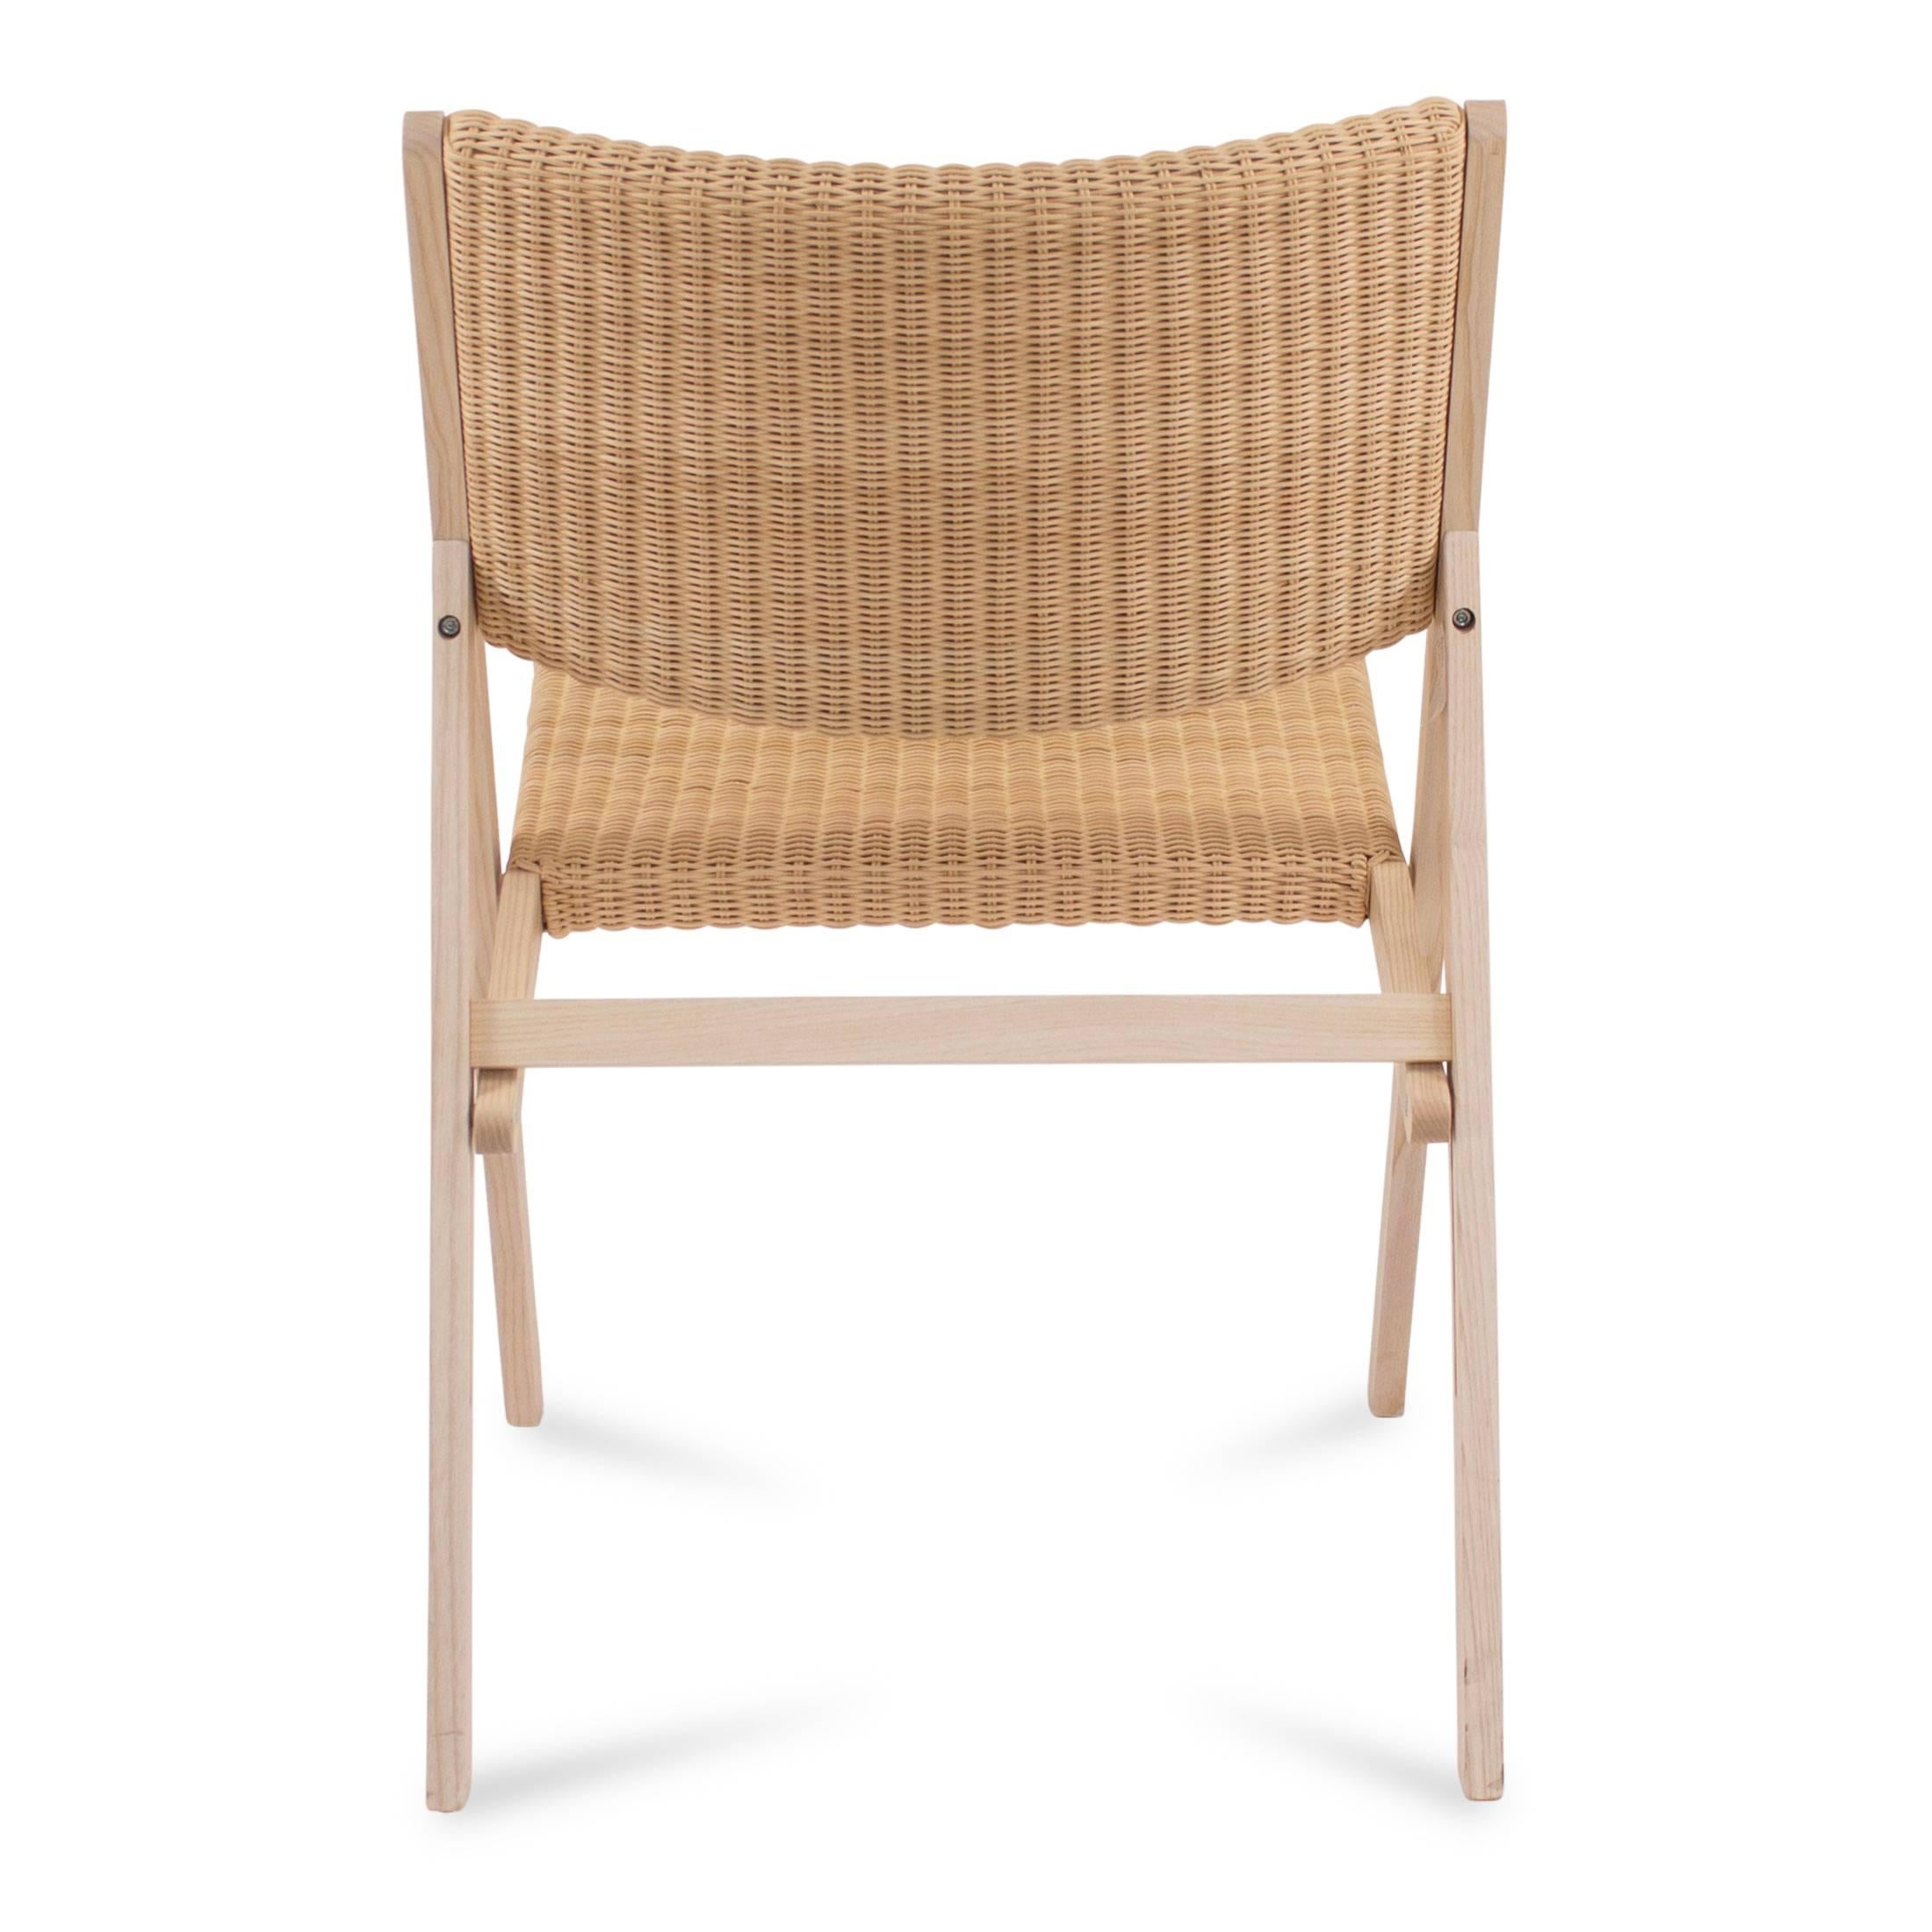 Italian Wicker Folding Indoor Outdoor Chairs by Gio Ponti for Molteni, Italy For Sale